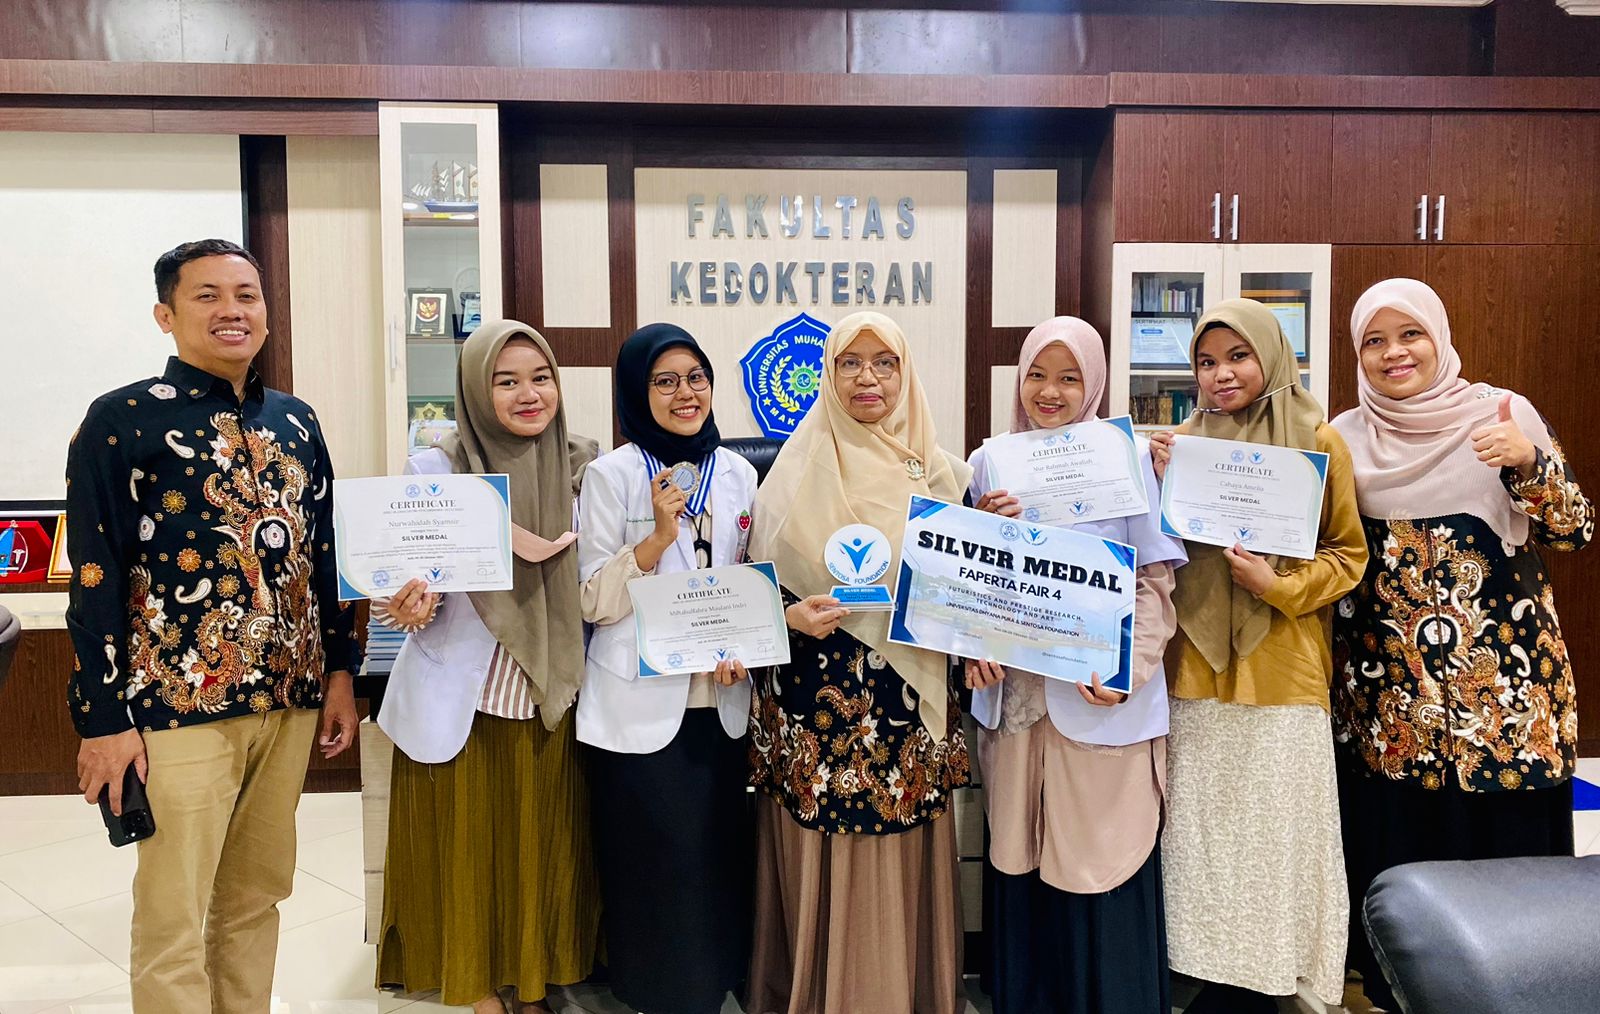 Success for Universitas Muhammadiyah (Unismuh) Makassar’s Faculty of Medicine and Health Sciences (FMHS) Students in ‘Futuristics and Prestige Research, Technology, and Art’ (FAPERTA FAIR 4)